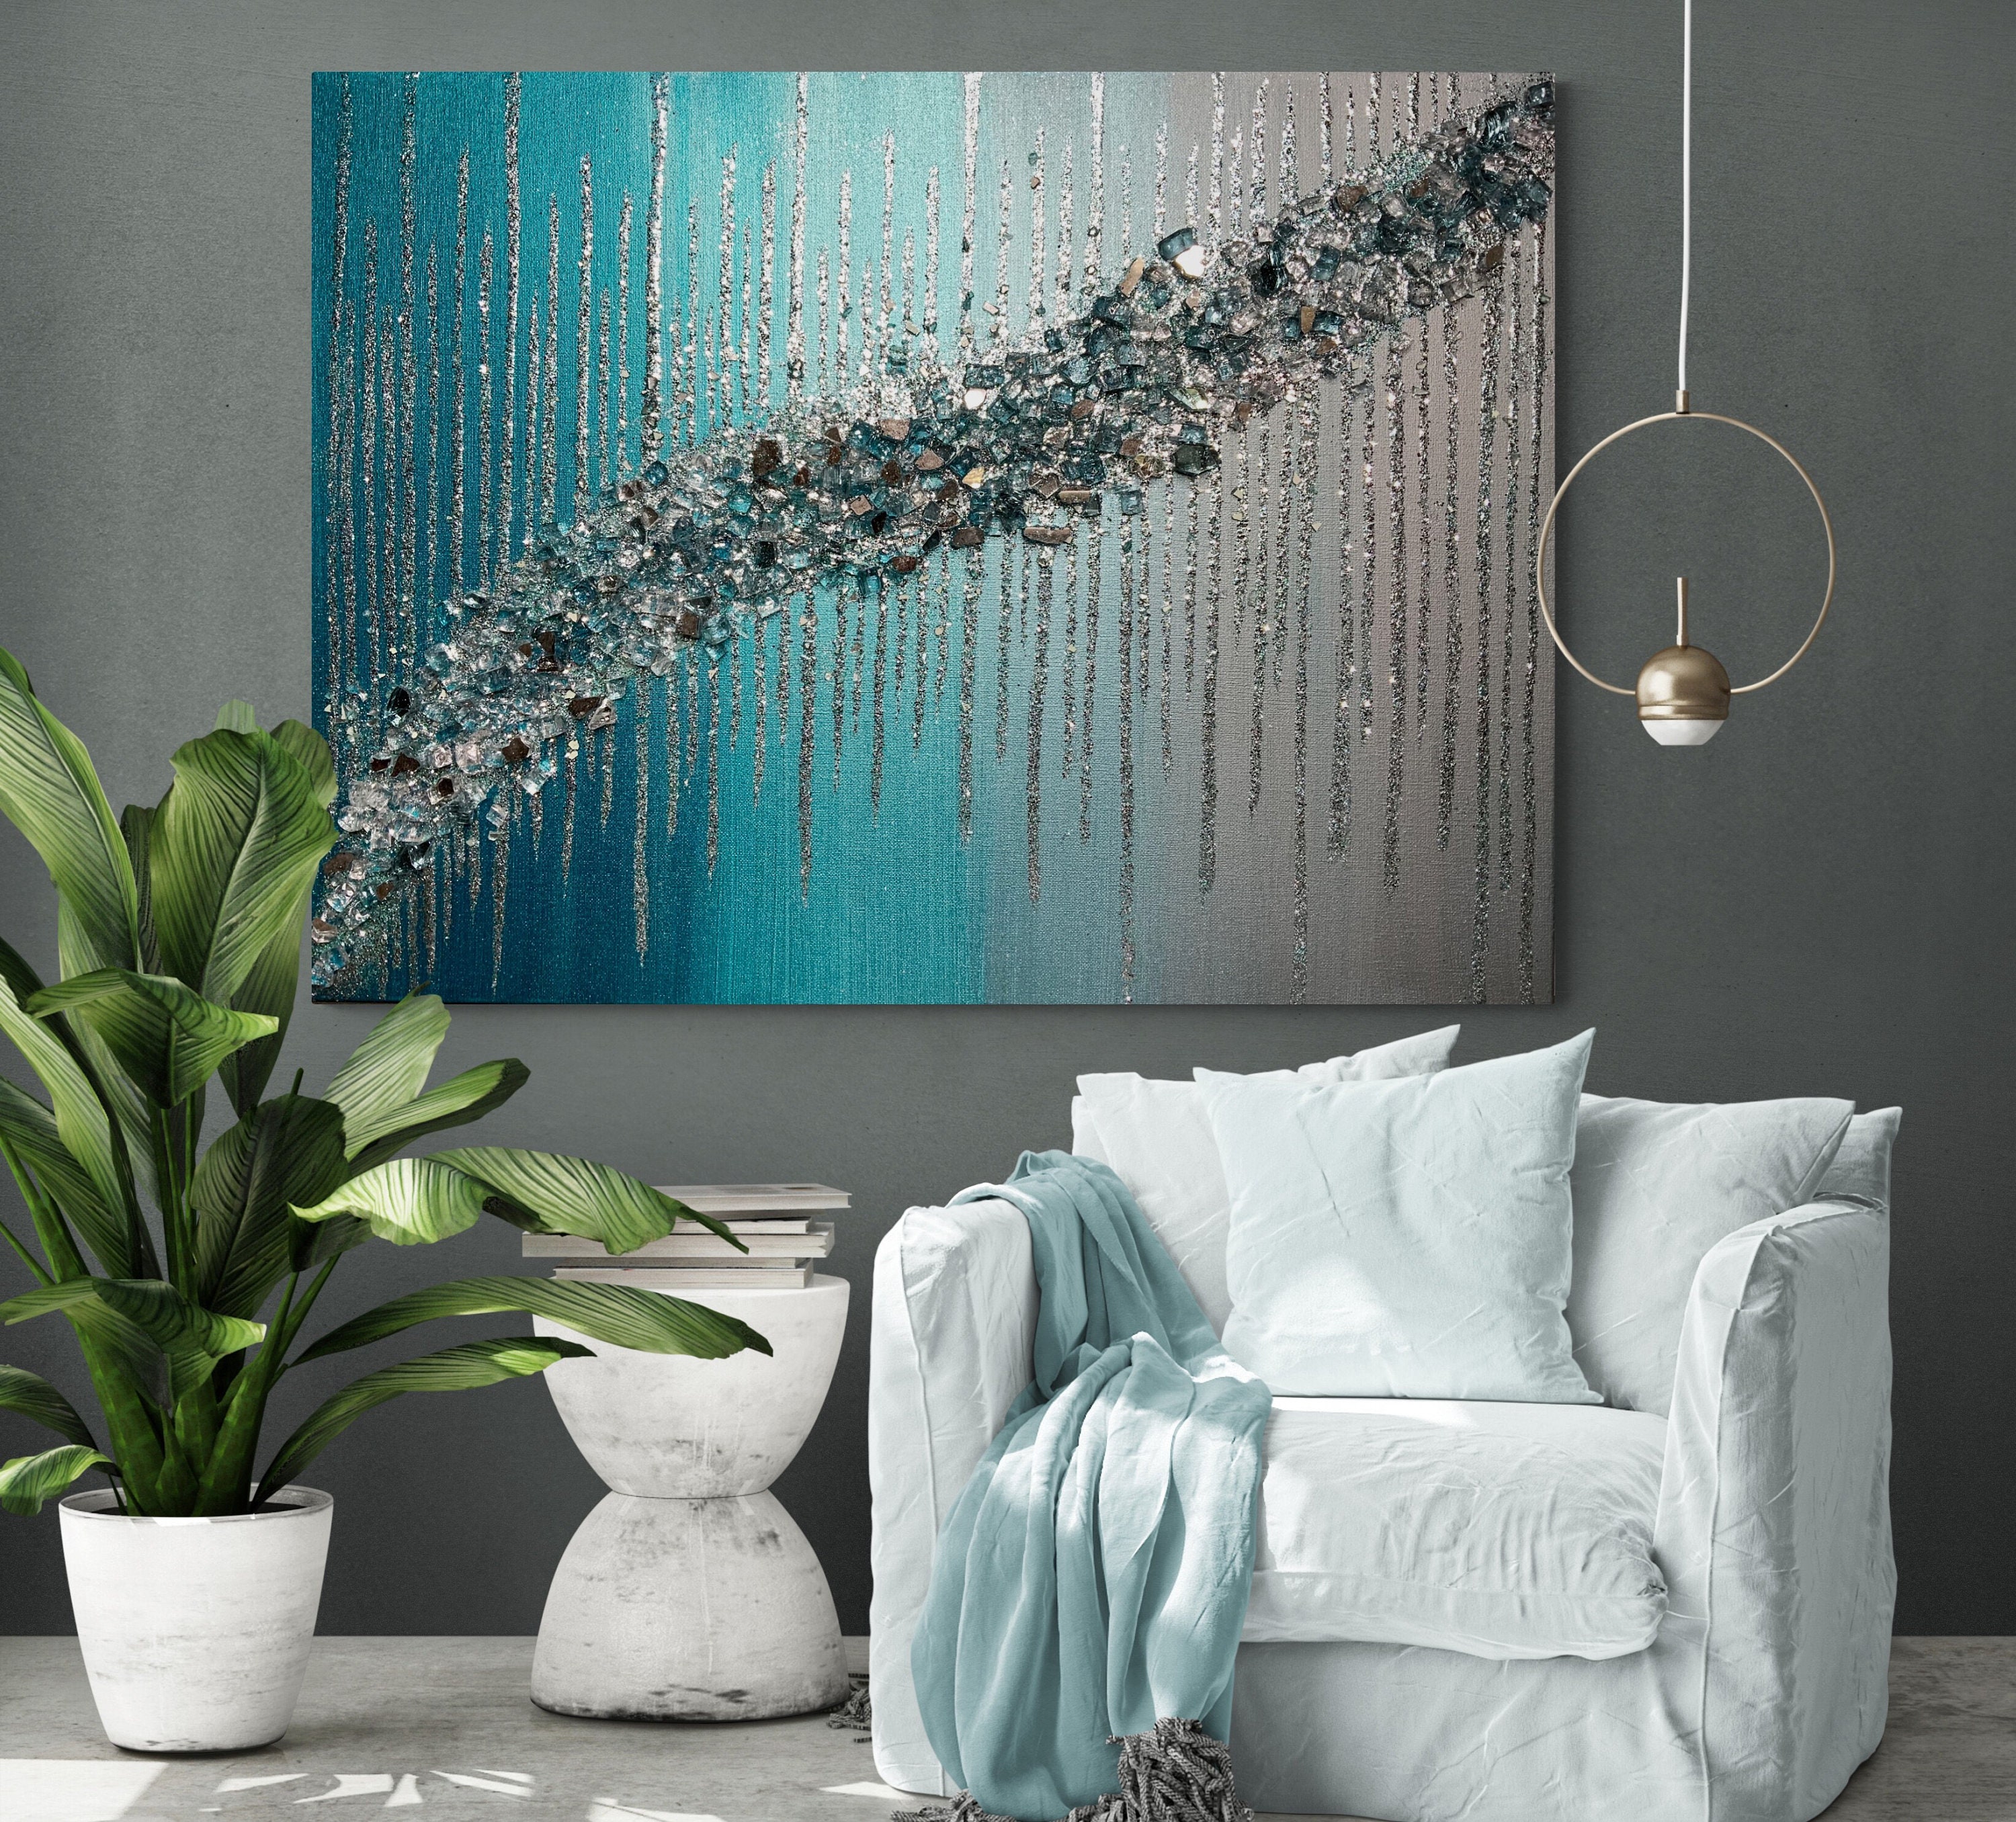 Turquoise & Teal Silver Glitter and Glass Painting, Glitter Painting, Glass  Painting, Glam Decor, Glam Decor, Glam Wall Art, Blue Paintings 